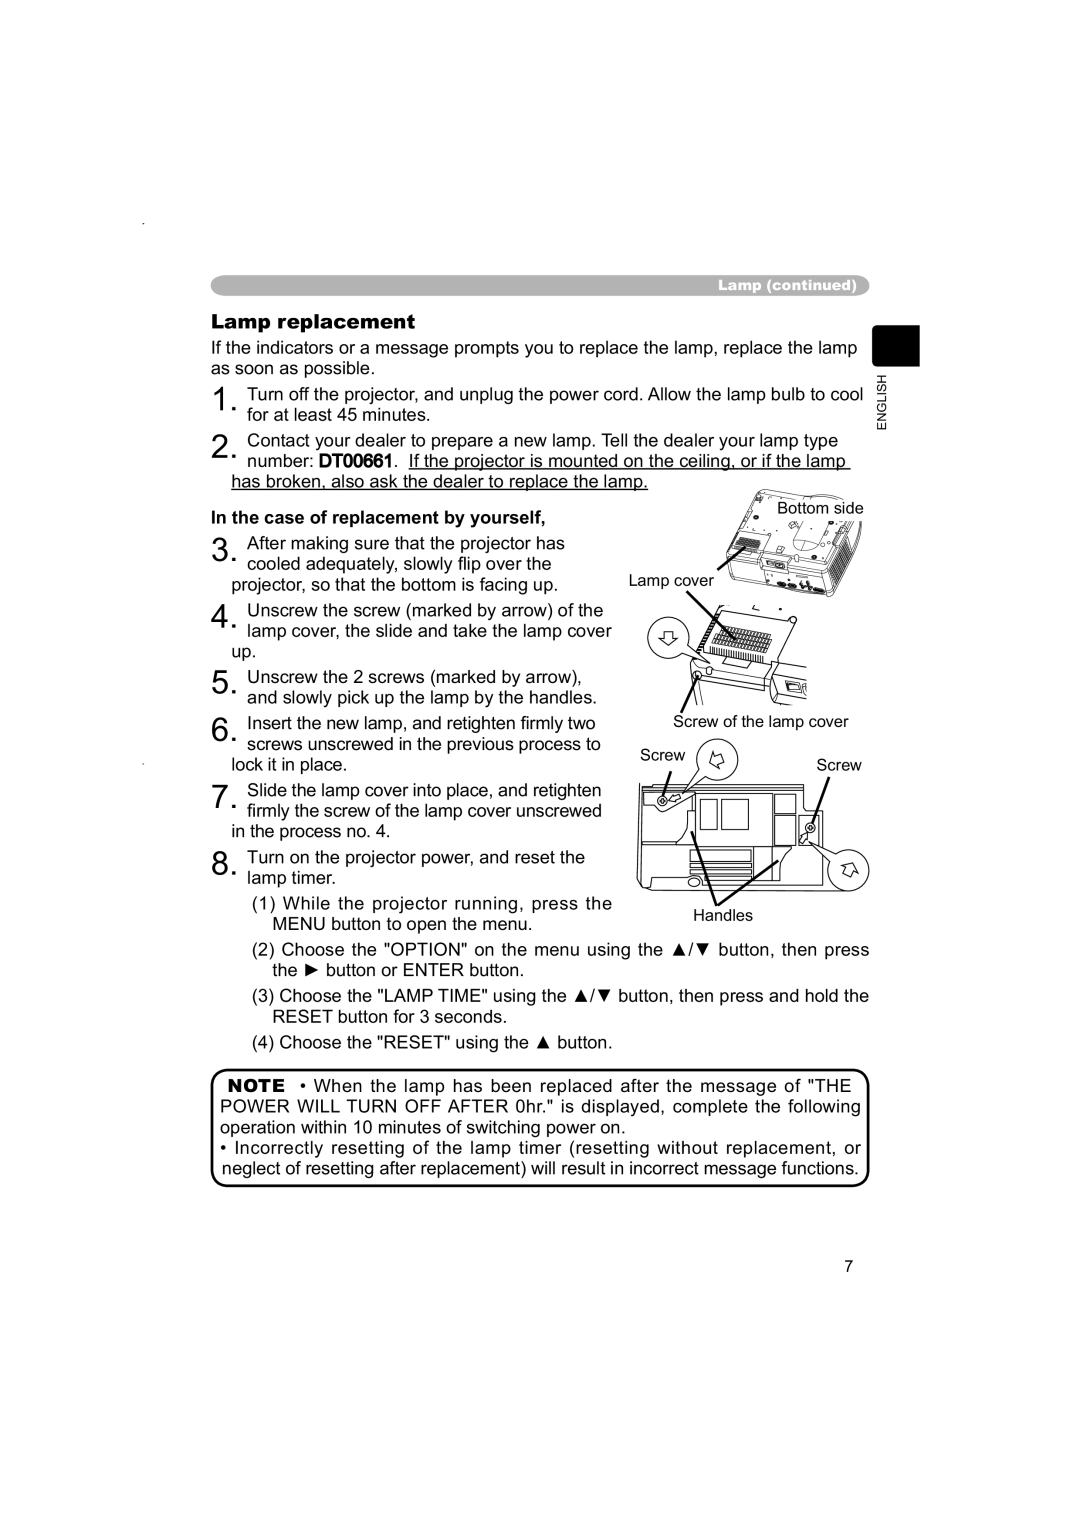 Hitachi PJ-TX100 user manual Lamp replacement, In the case of replacement by yourself 